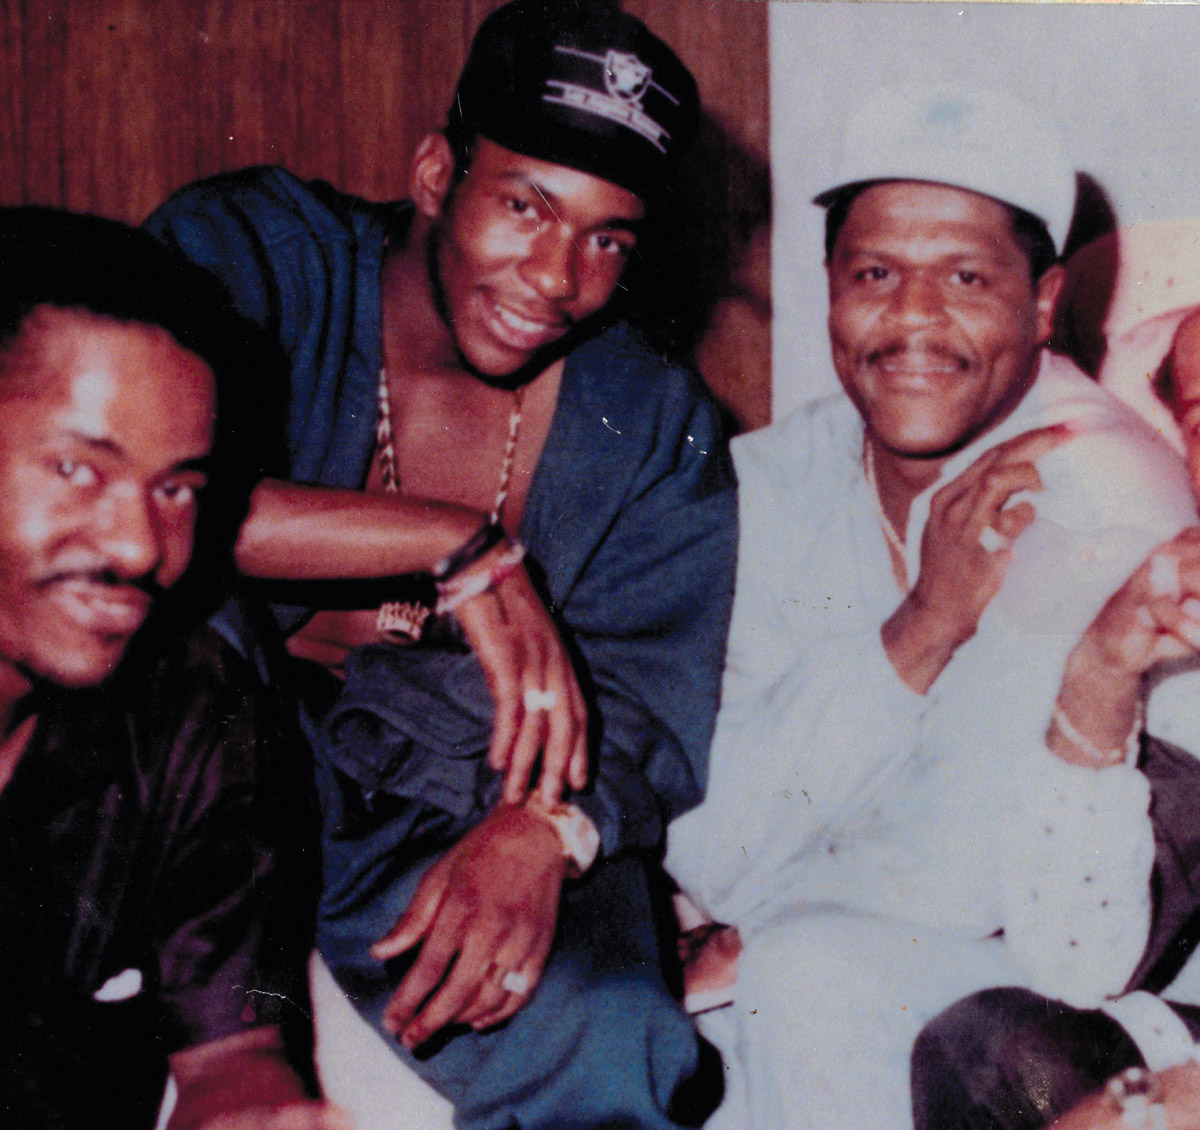 An Oral History of Magic City: Bobby Brown and Barney, 1989